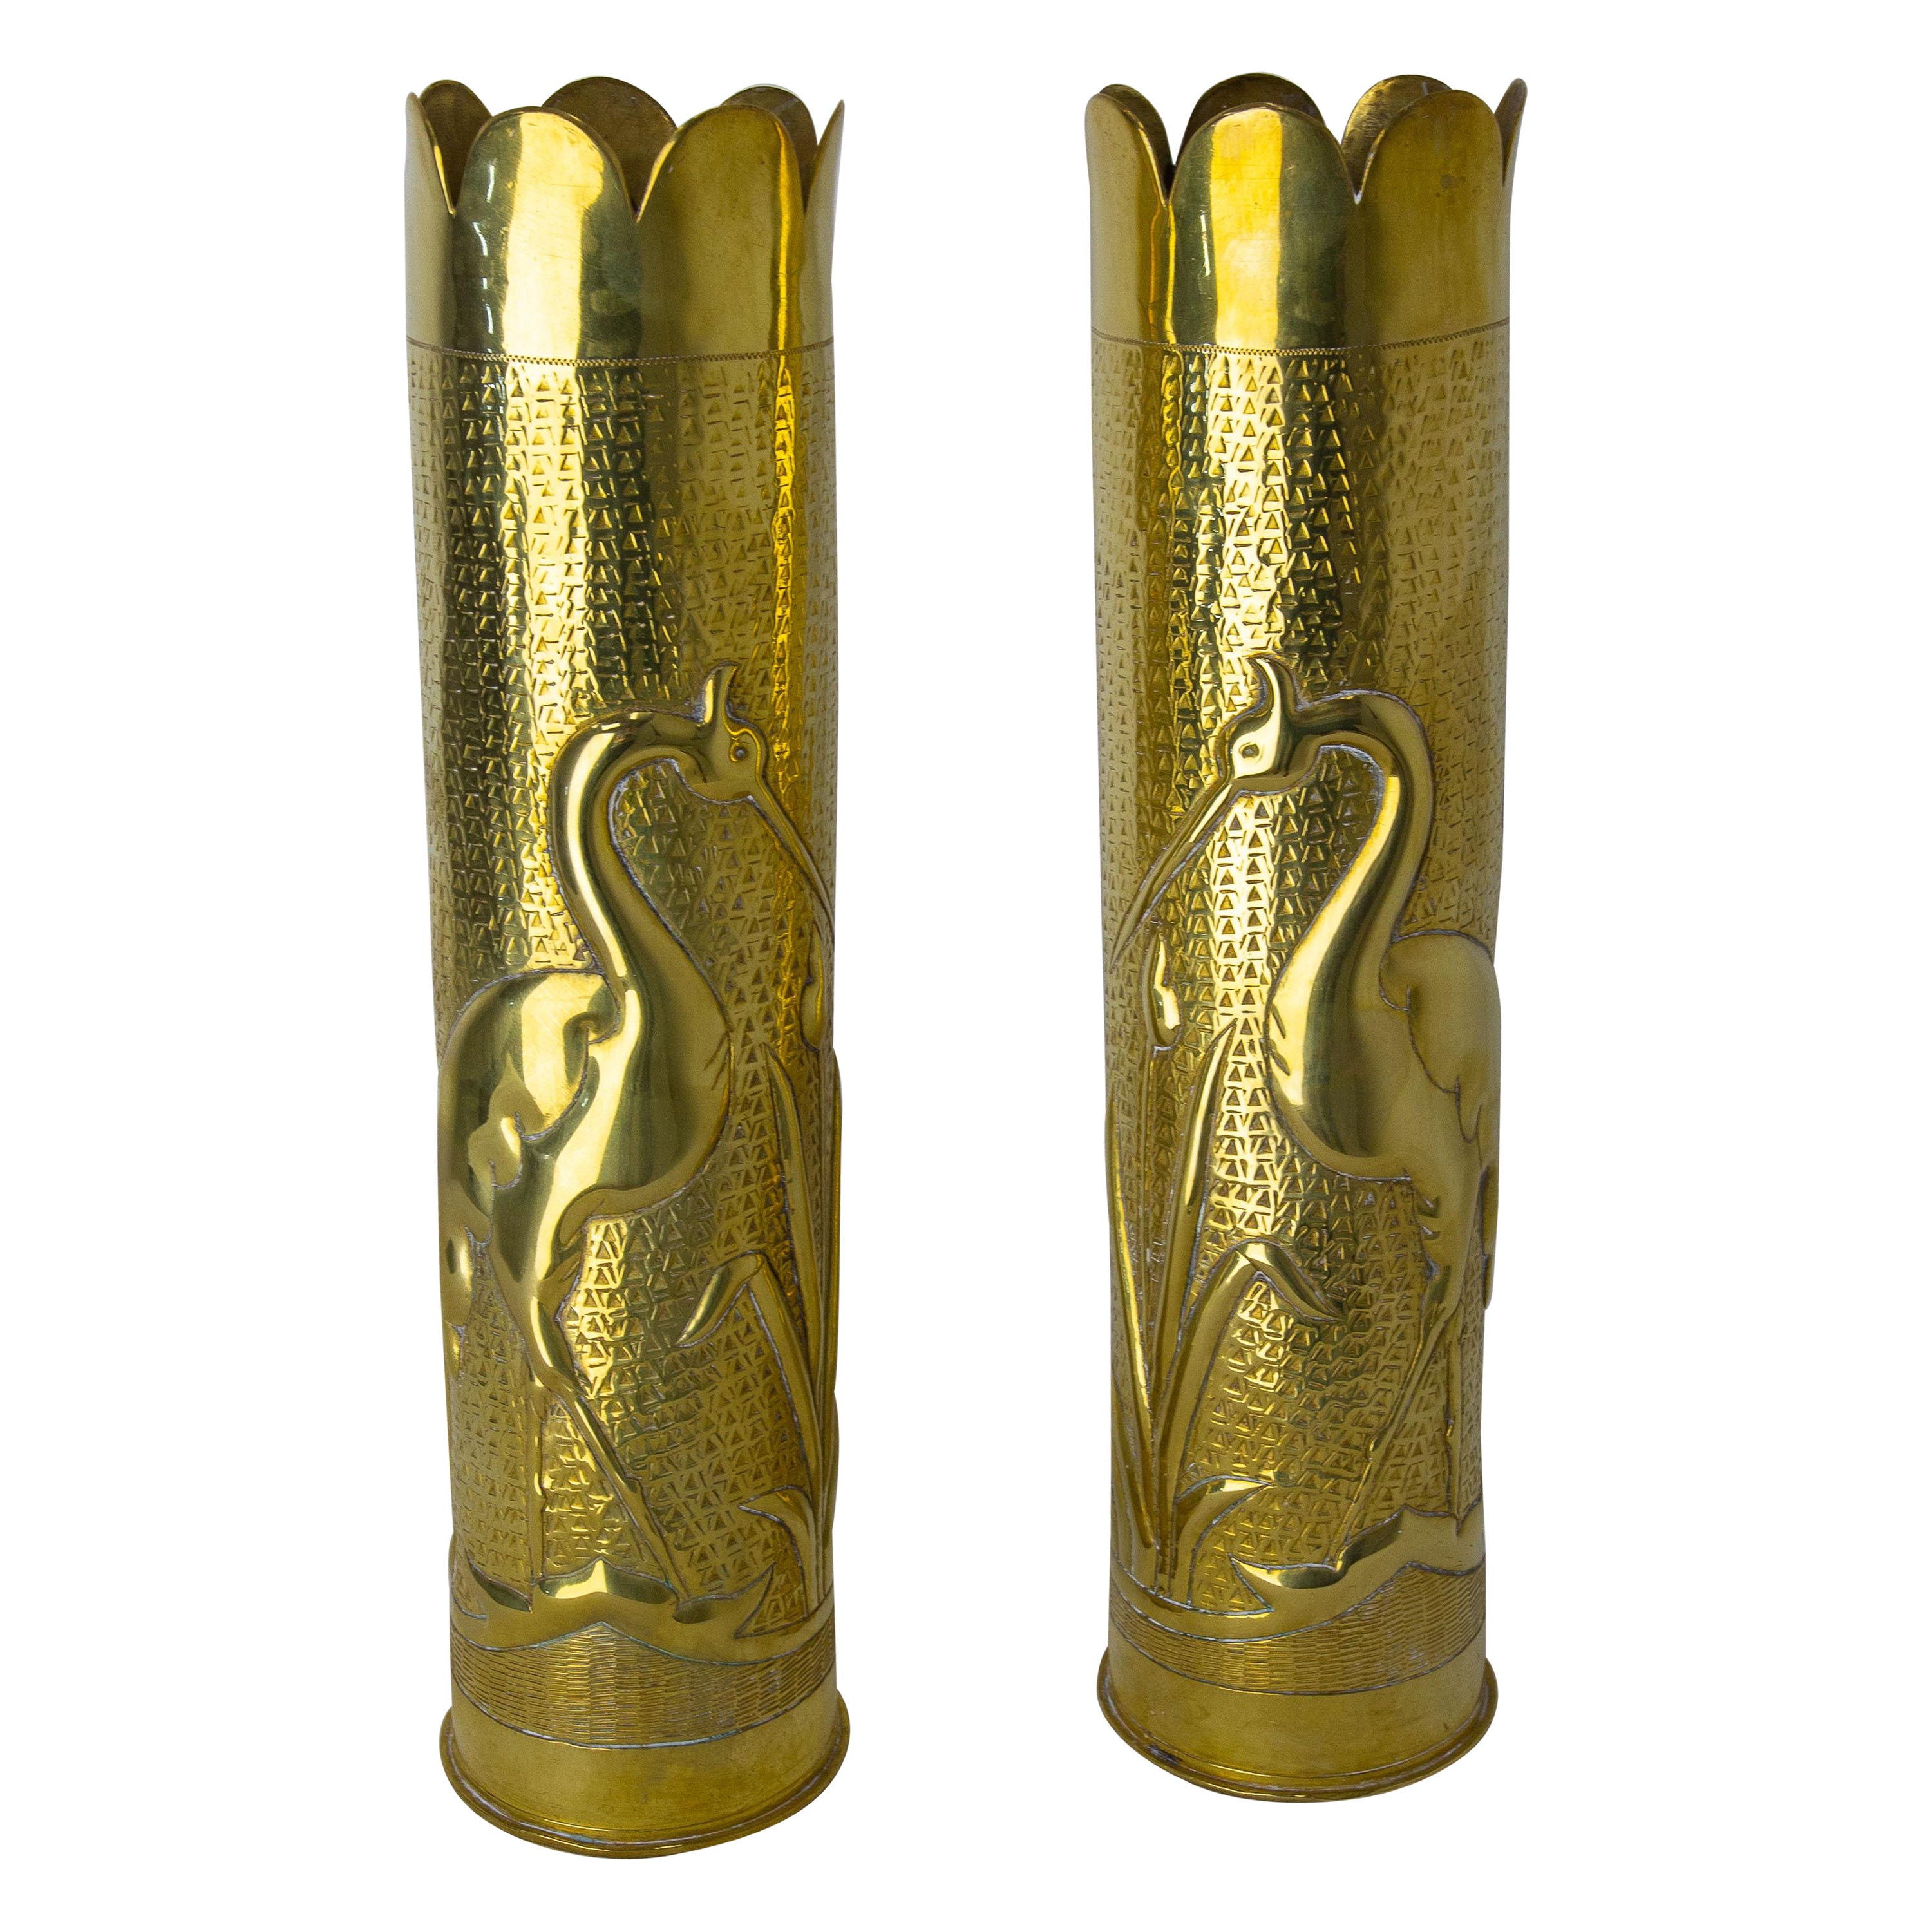 French Pair of World War I Brass Heron Engraved Shells Casing Trench Artillery